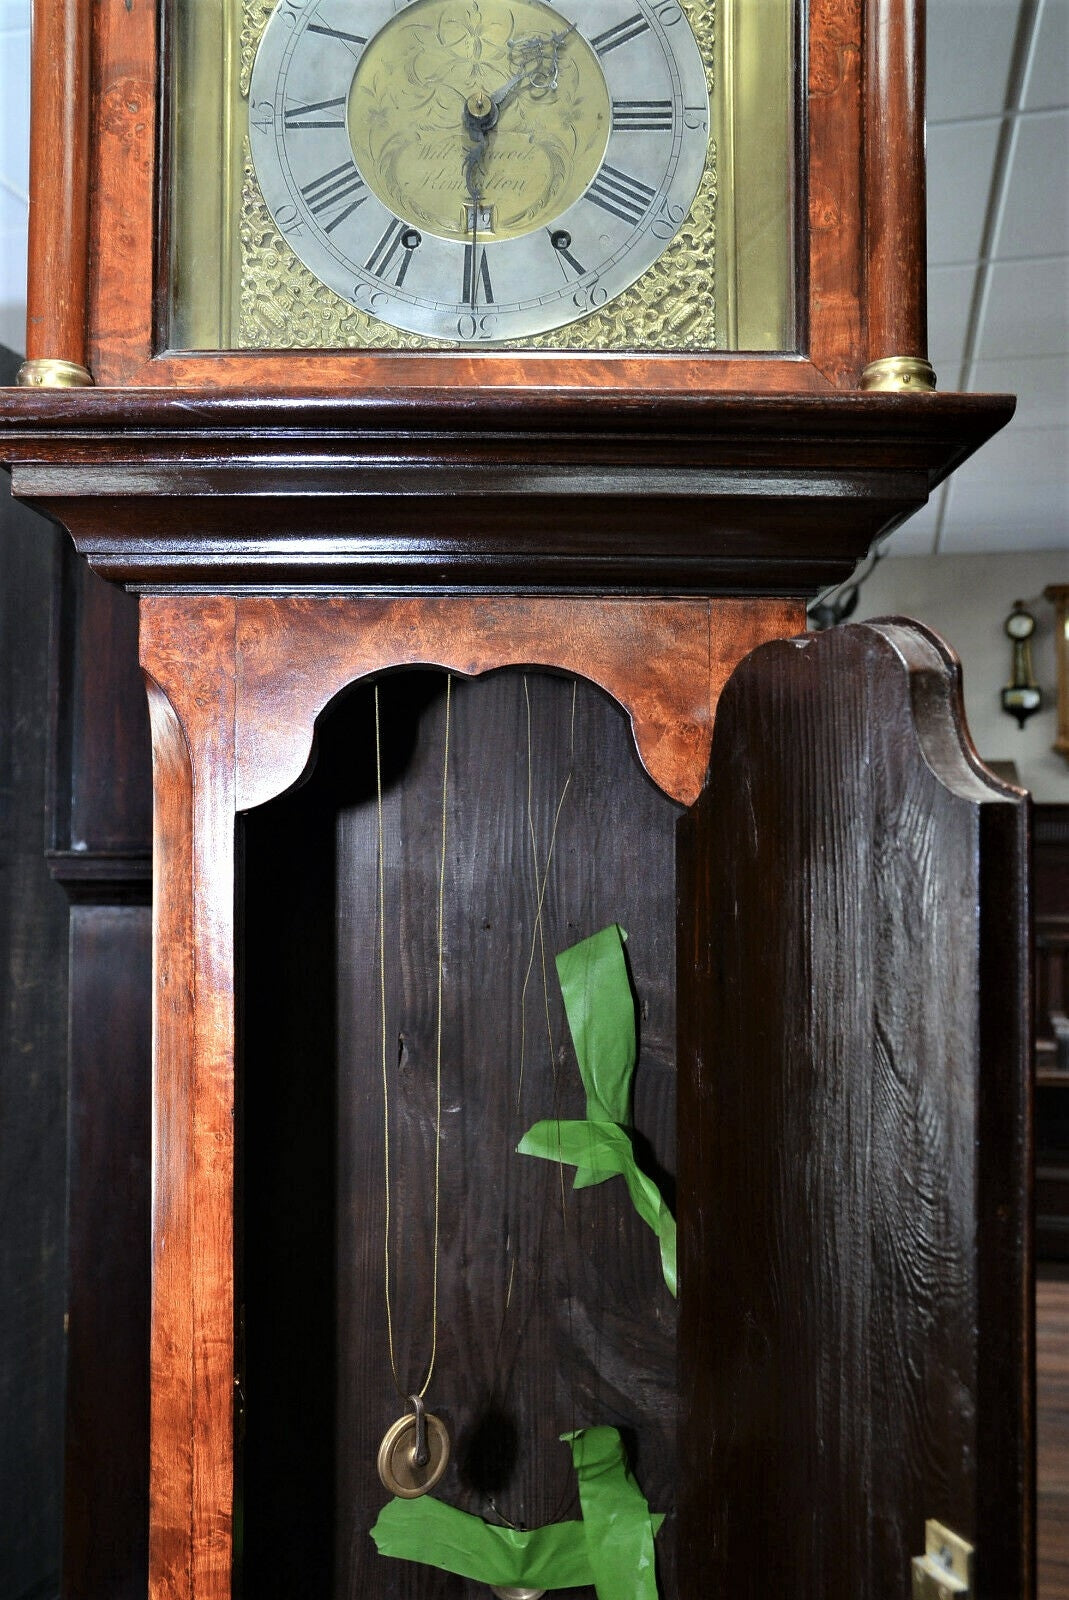 c016 William Peacock Kimbolton Grandfather Clock - Local Pickup Only